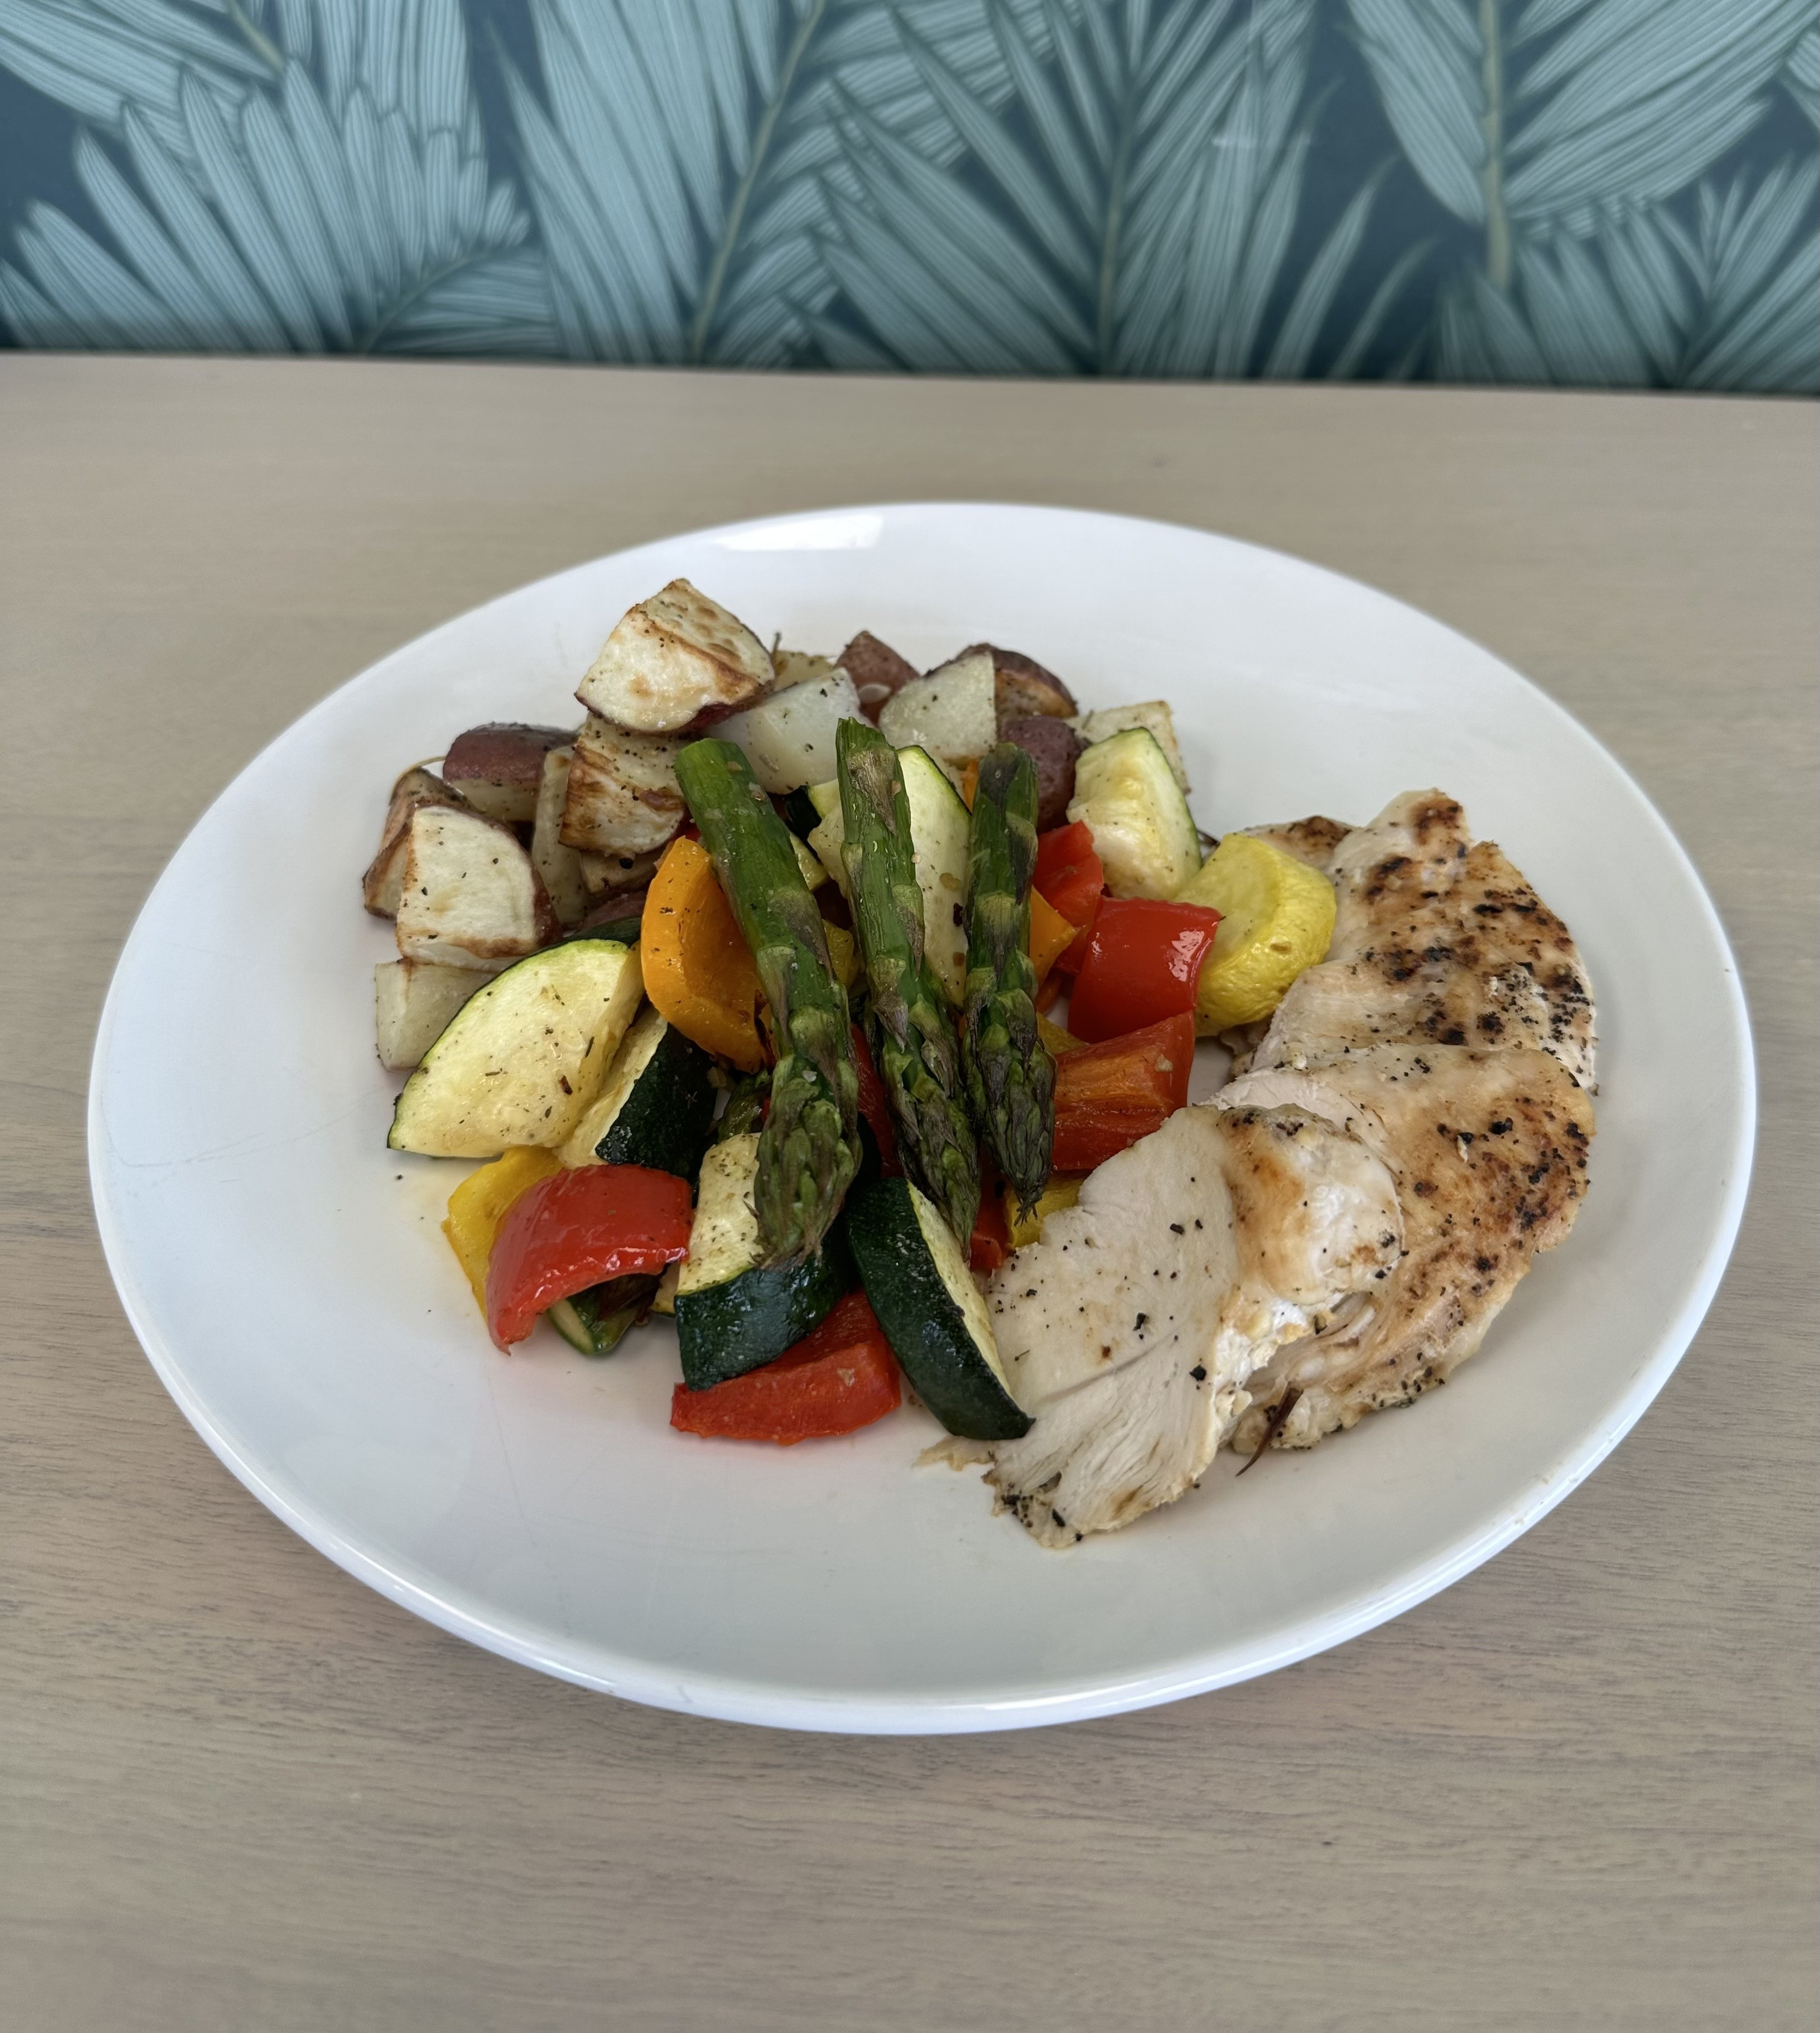 Vegetable Medley With Grilled Chicken & Rosemary Potatoes